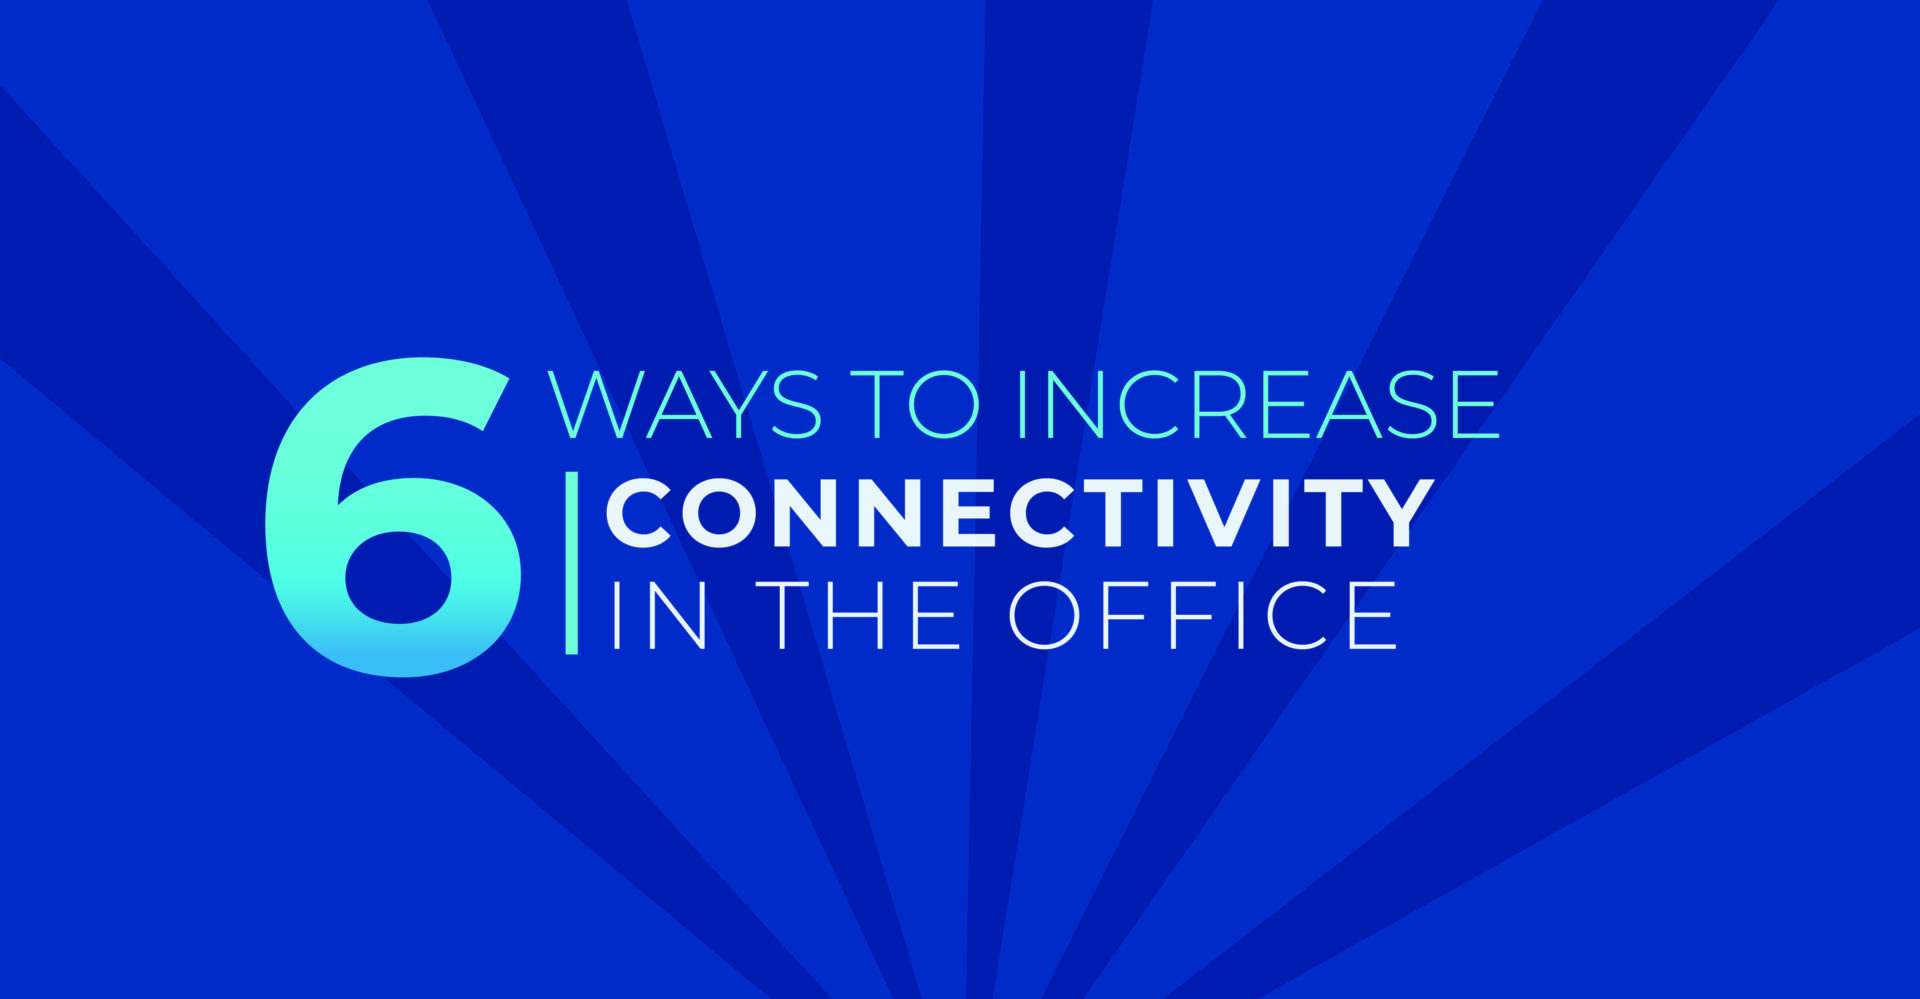 6 Ways to Increase Connectivity In the Office